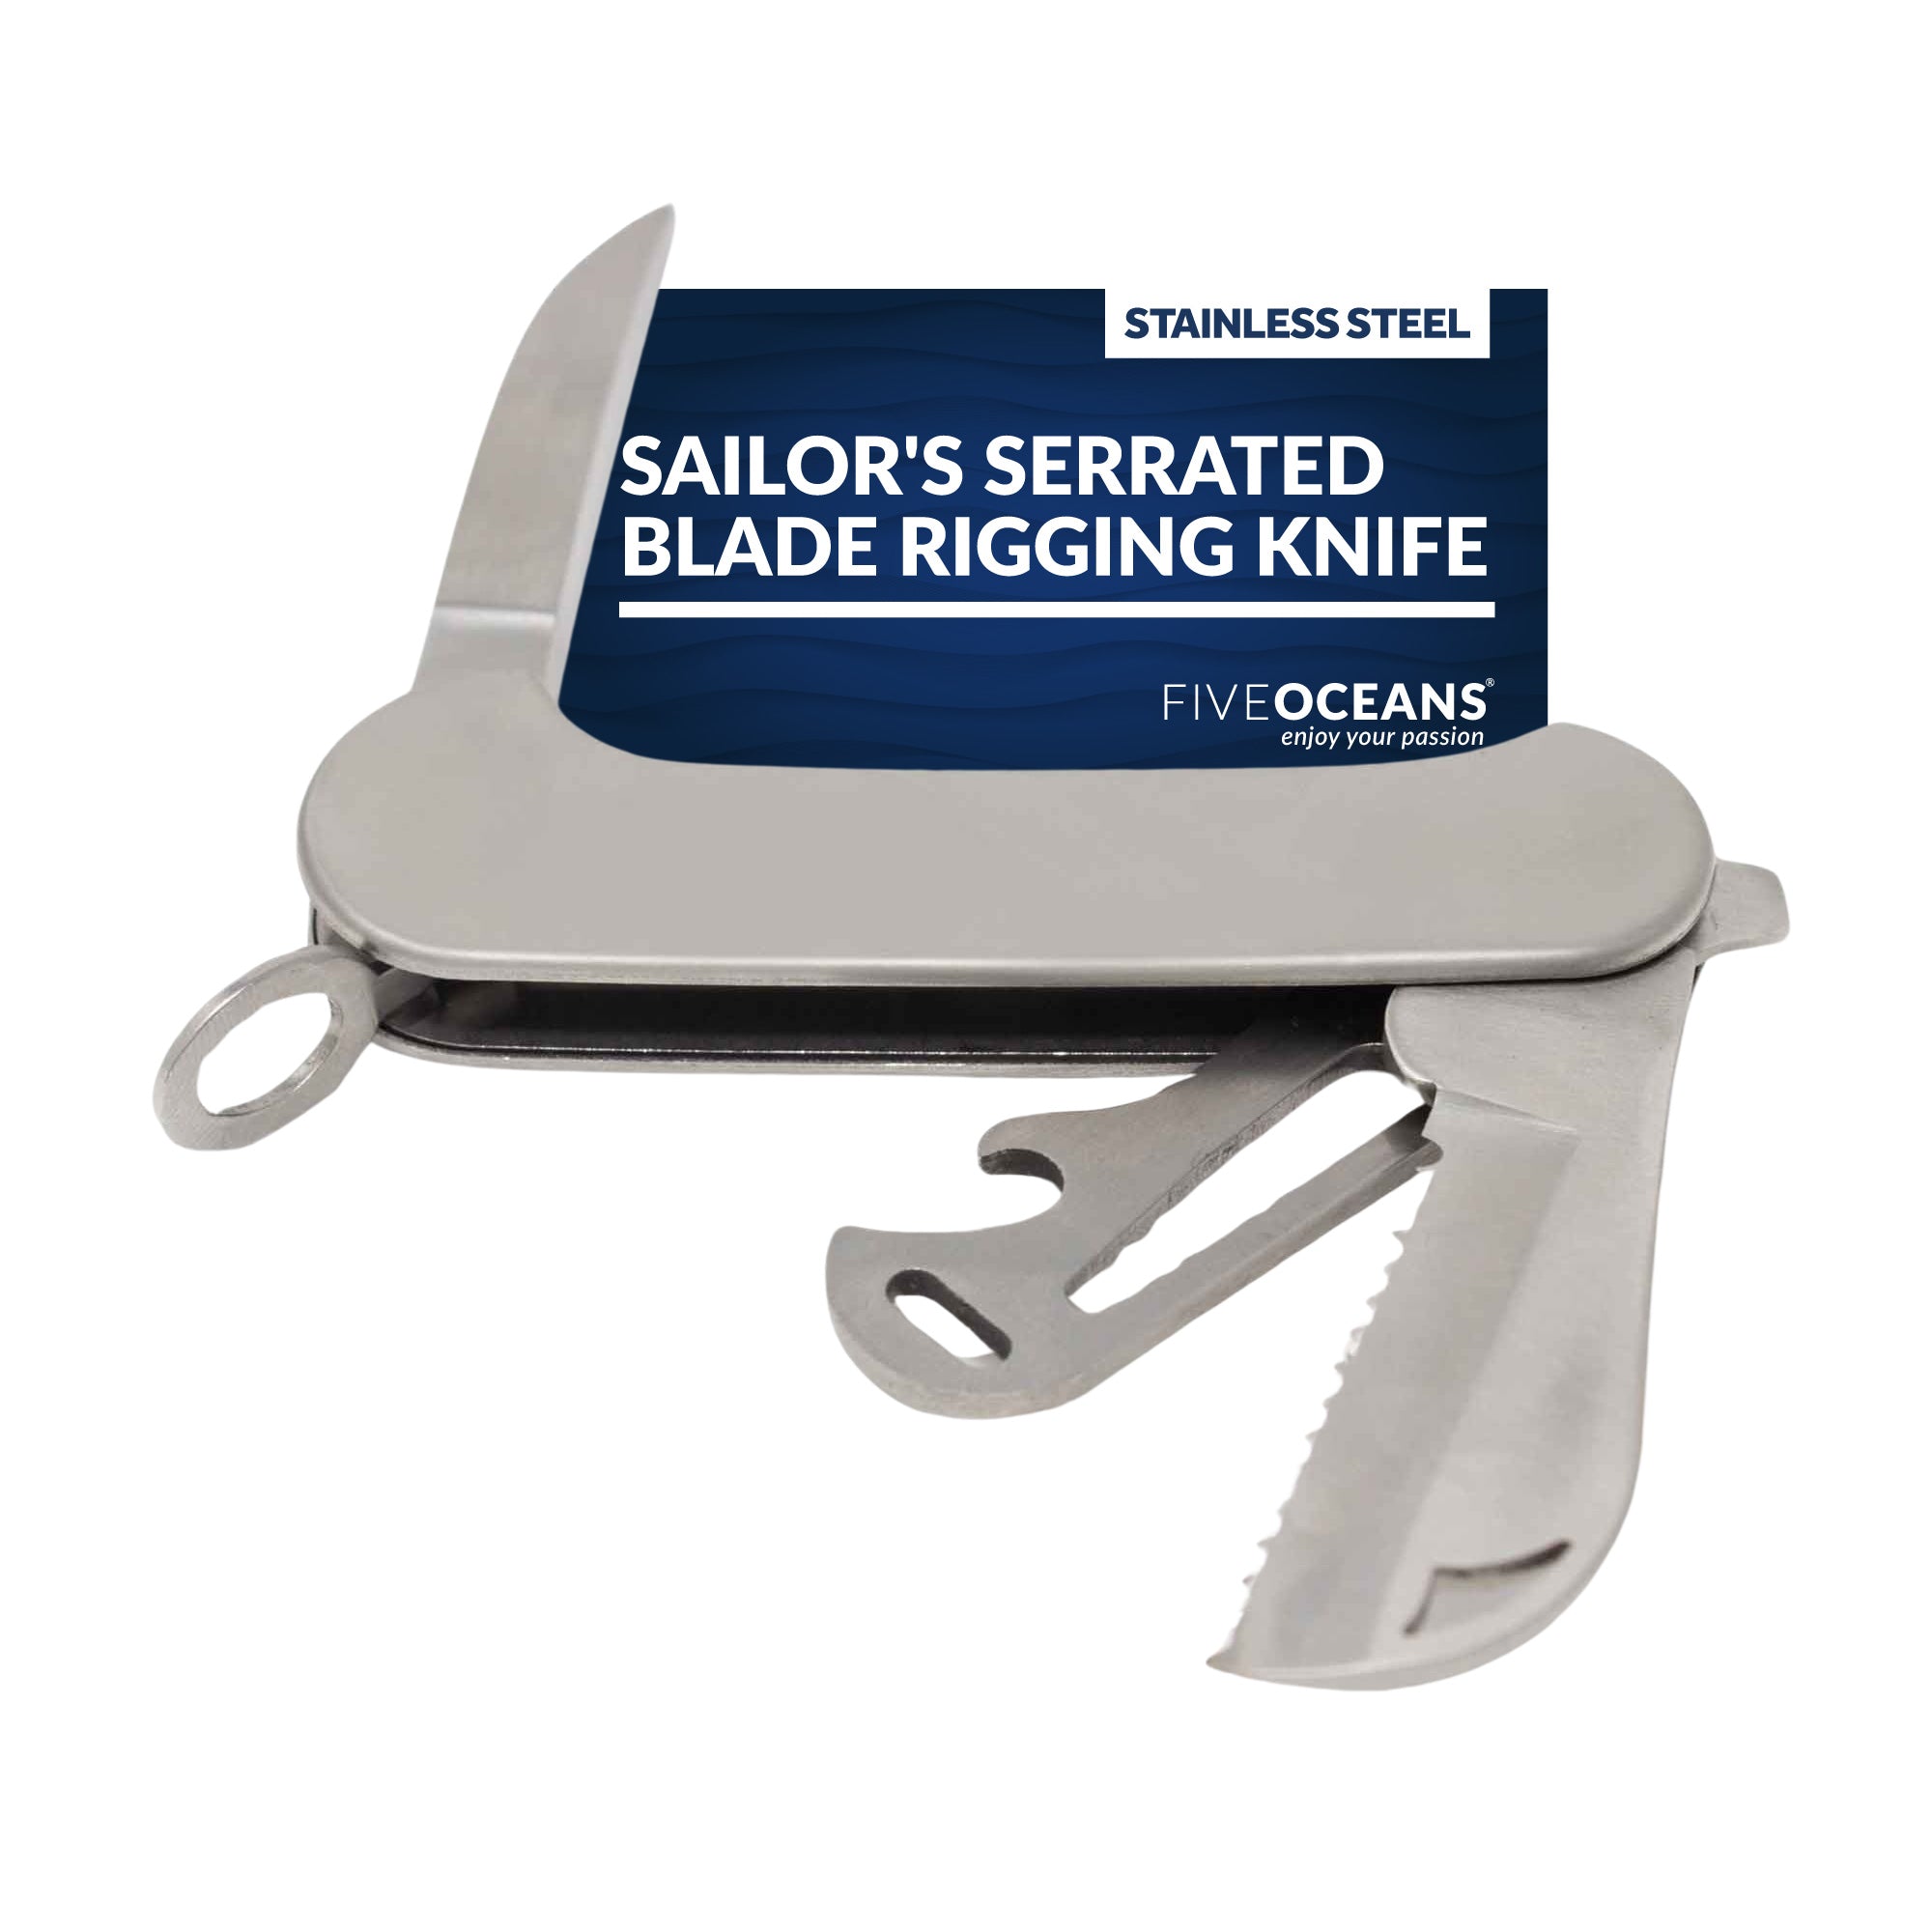 Sailor's Serrated Blade Rigging Knife - FO124